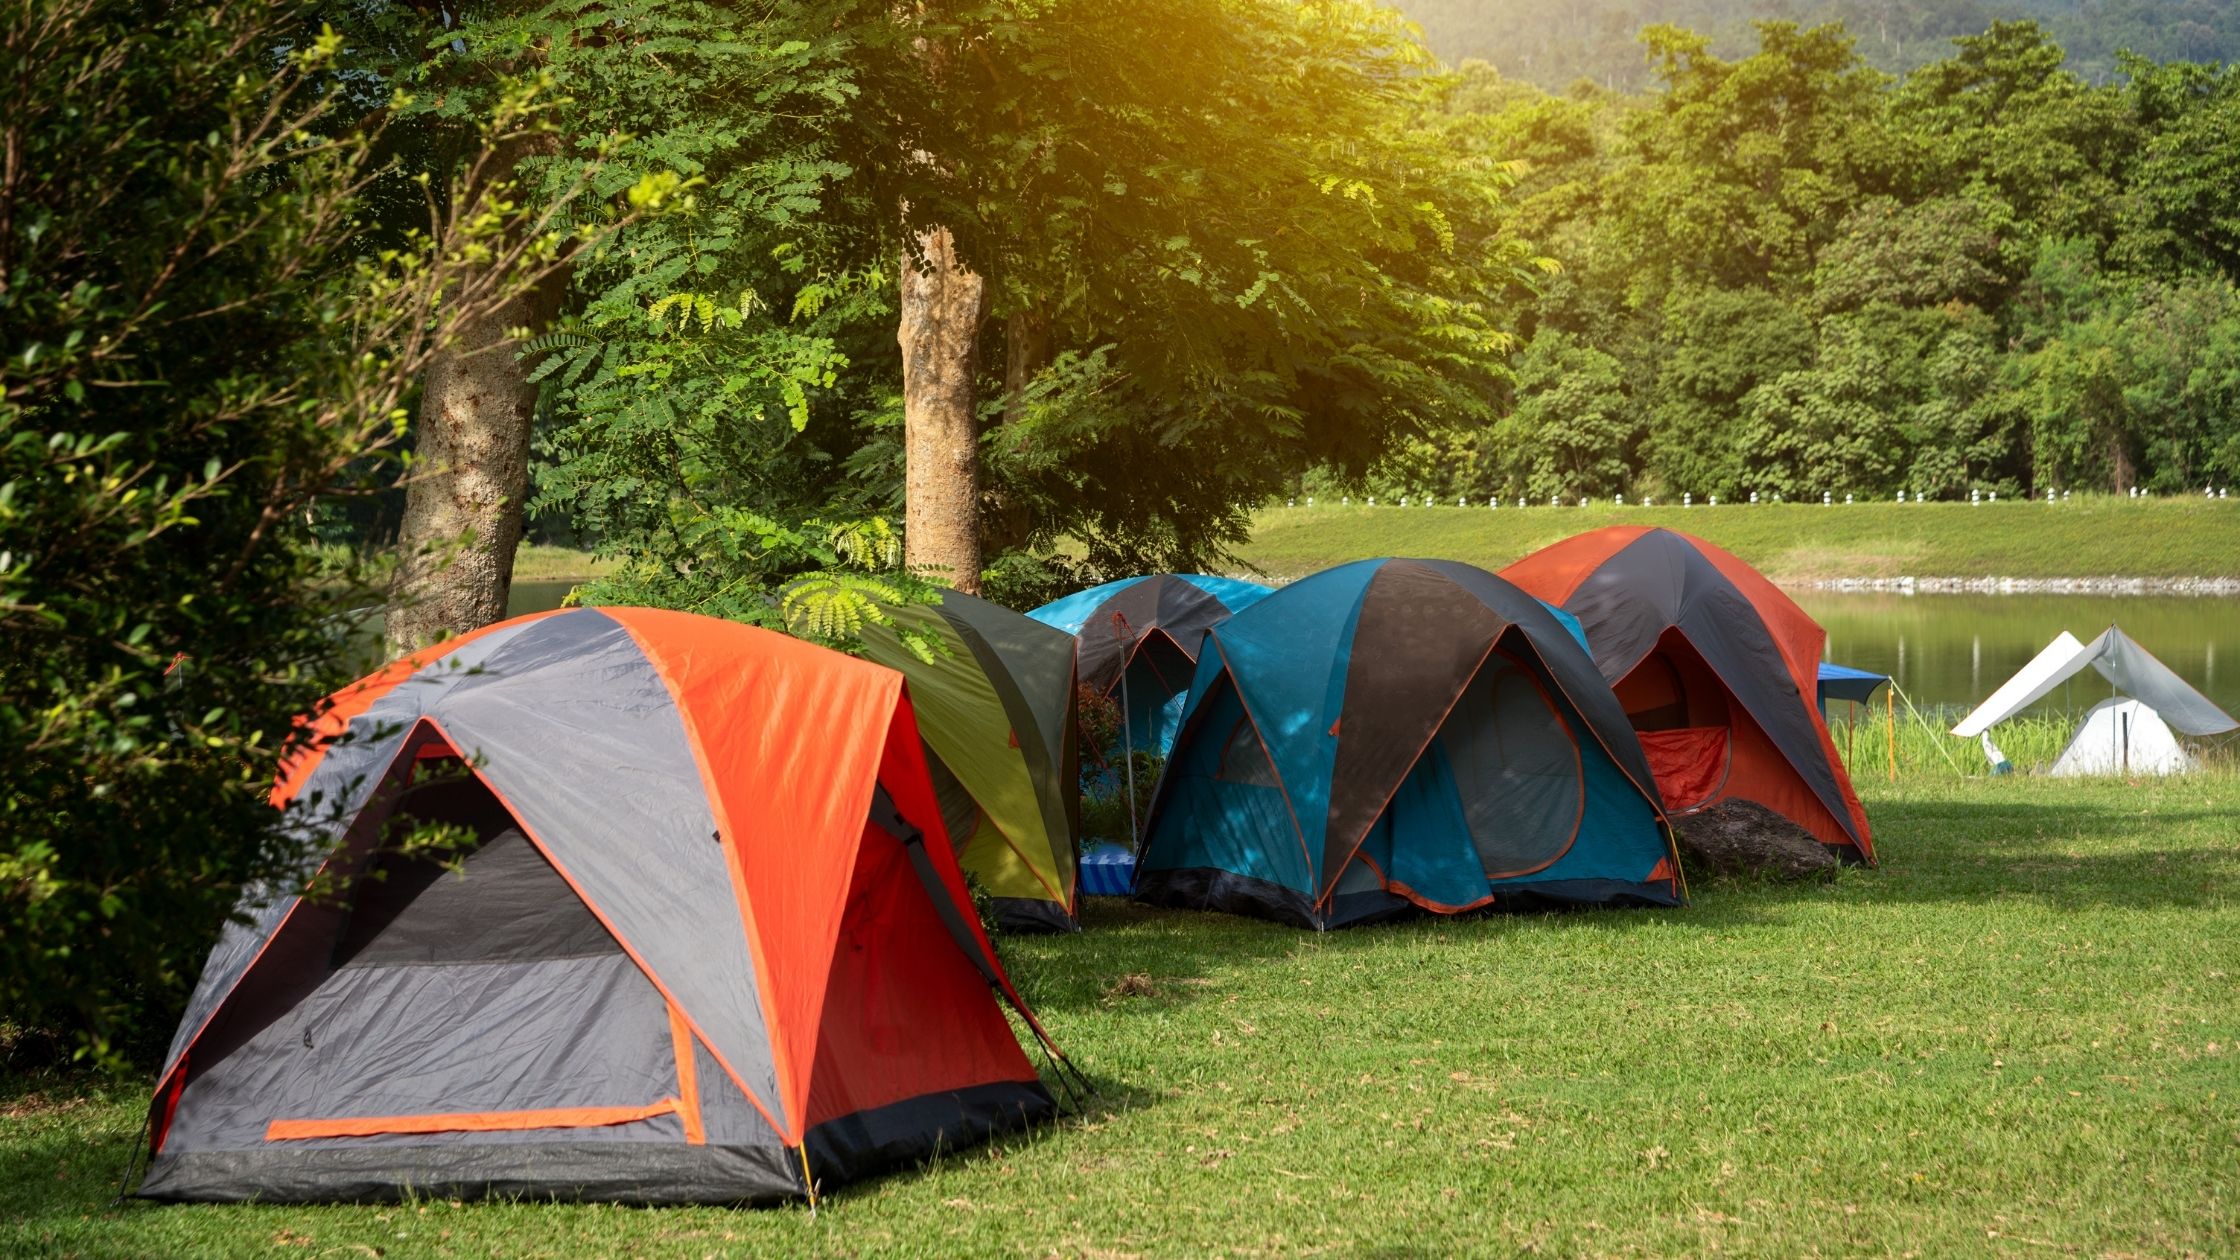 Where Can I Rent a Camping Tent?